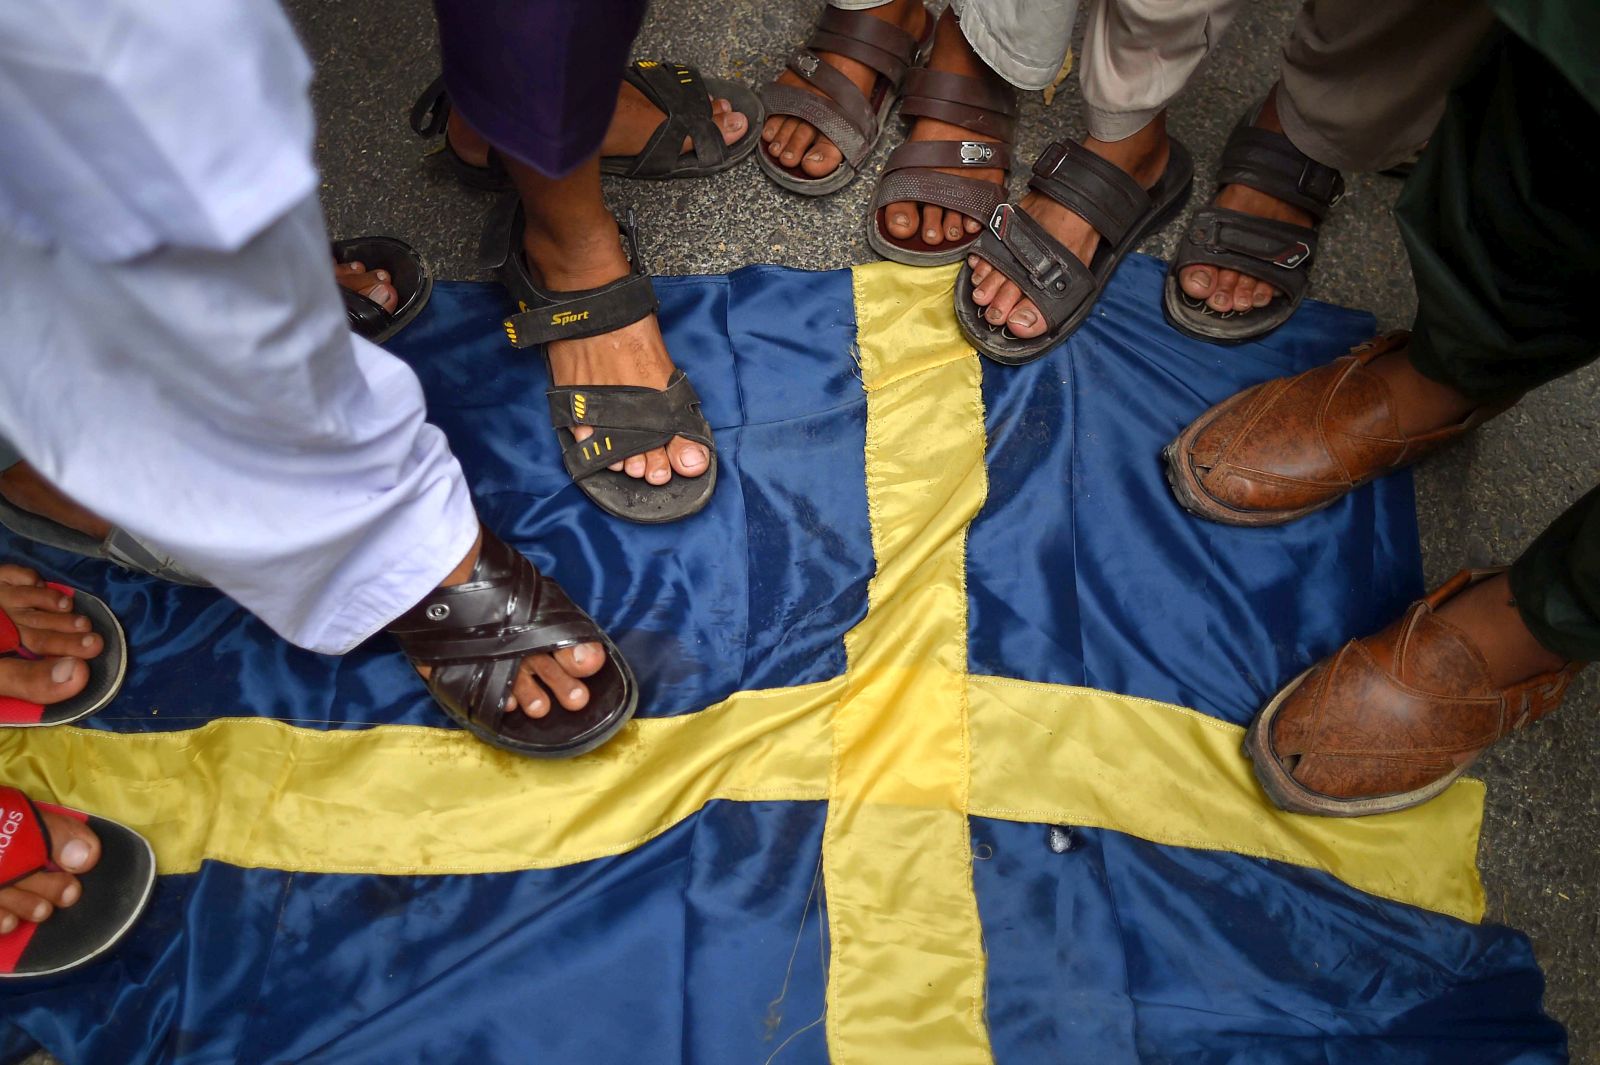 epa10732665 Demonstrators step on a mock Swedish flag during a protest against the burning of a copy of the Muslim holy book in Sweden, in Karachi, Pakistan, 07 July 2023. Pakistan's prime minister called for nationwide protests on 07 July against a recent desecration of the Koran, the holy book of Islam, in Sweden. An Iraqi refugee living in Sweden set fire to a copy of the Koran during a protest in front of a mosque in Stockholm on 28 June 2023. The act drew widespread outrage and condemnation from several countries, including Pakistan, Turkey, Saudi Arabia, Jordan, Palestine, Morocco, Iran, Iraq, and the European Union.  EPA/SHAHZAIB AKBER